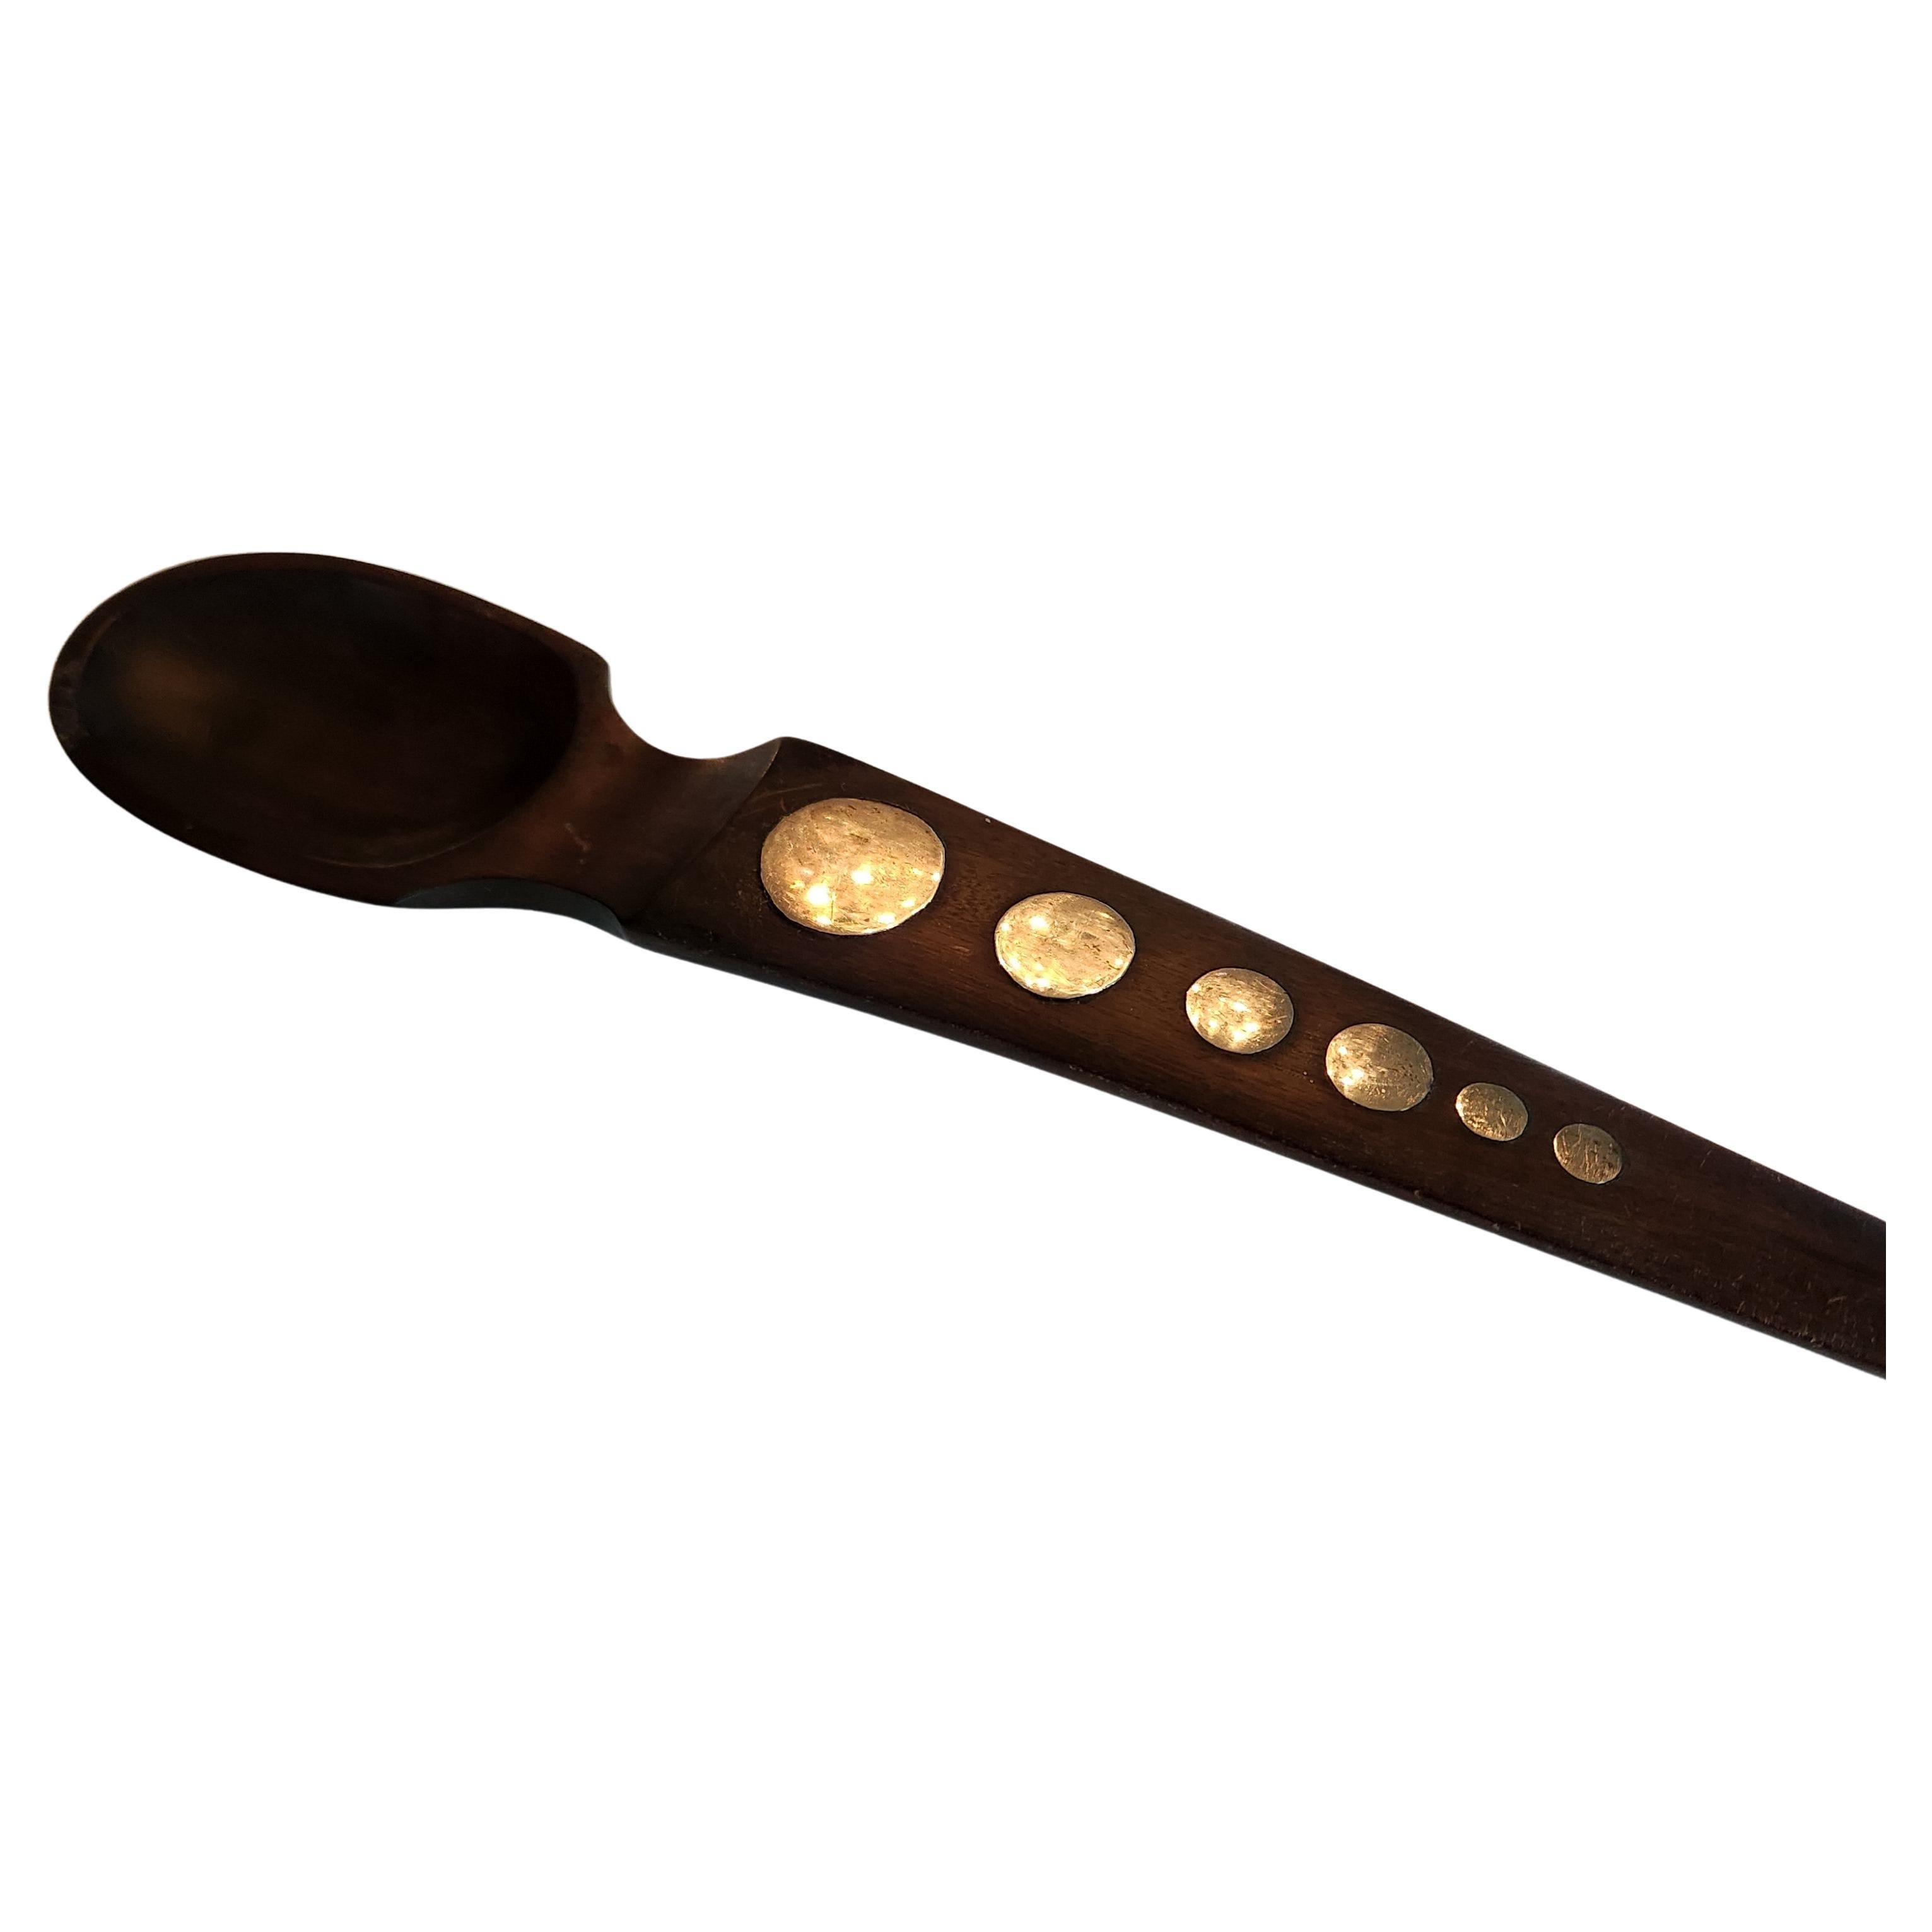 Mid-Century Modern 1950s William Spratling Rosewood Silver Serving Spoon Taxco Mexico For Sale